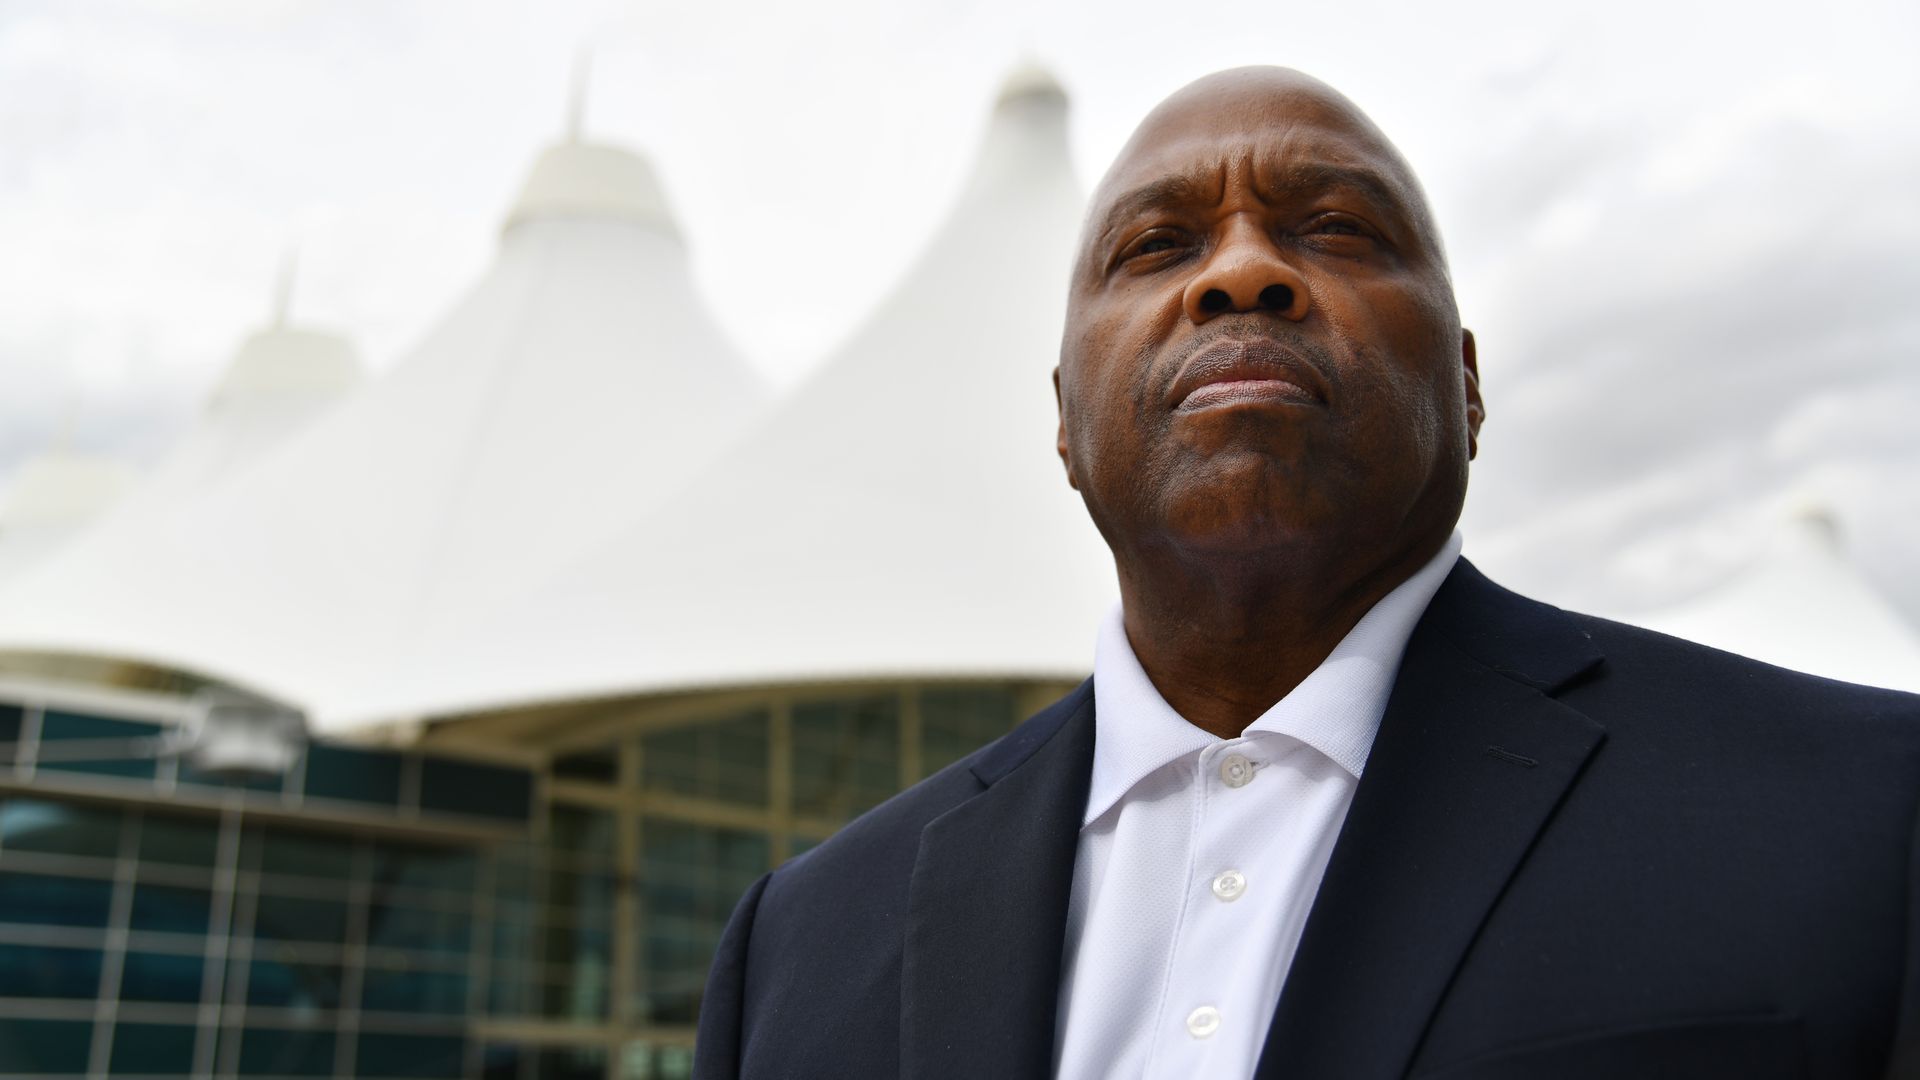 Phil Washington poses for a portrait at Denver International Airport on June 29, 2021. Photo: Hyoung Chang/Denver Post via Getty Images